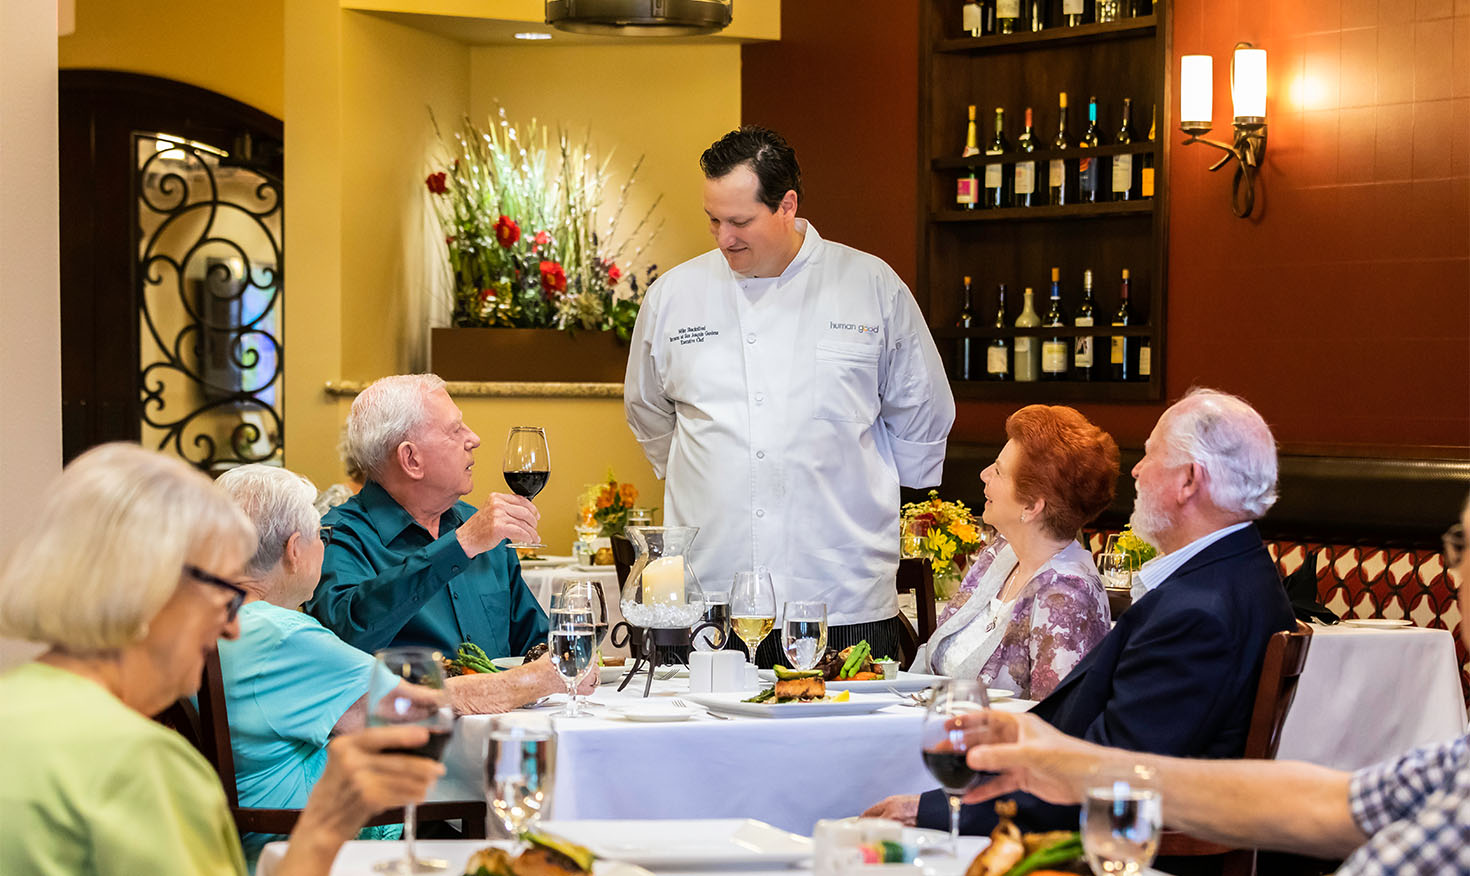 Group of seniors dining while talking to the chef